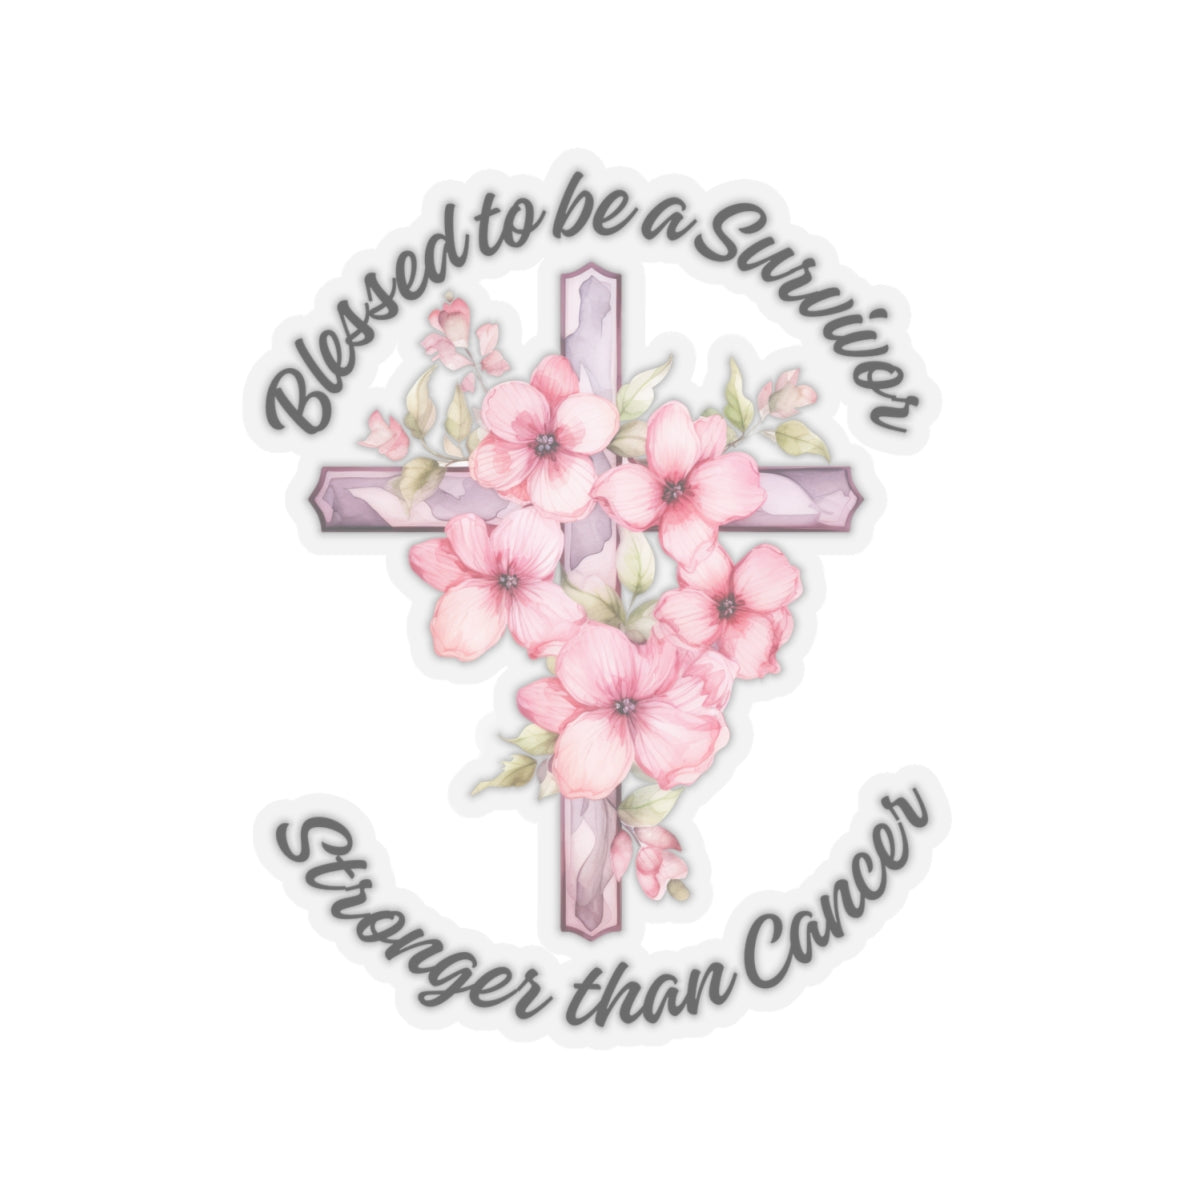 Blessed to Be A Survivor...Inspirational Quote Kiss-Cut Stickers-Paper products-4" × 4"-Transparent-mysticalcherry